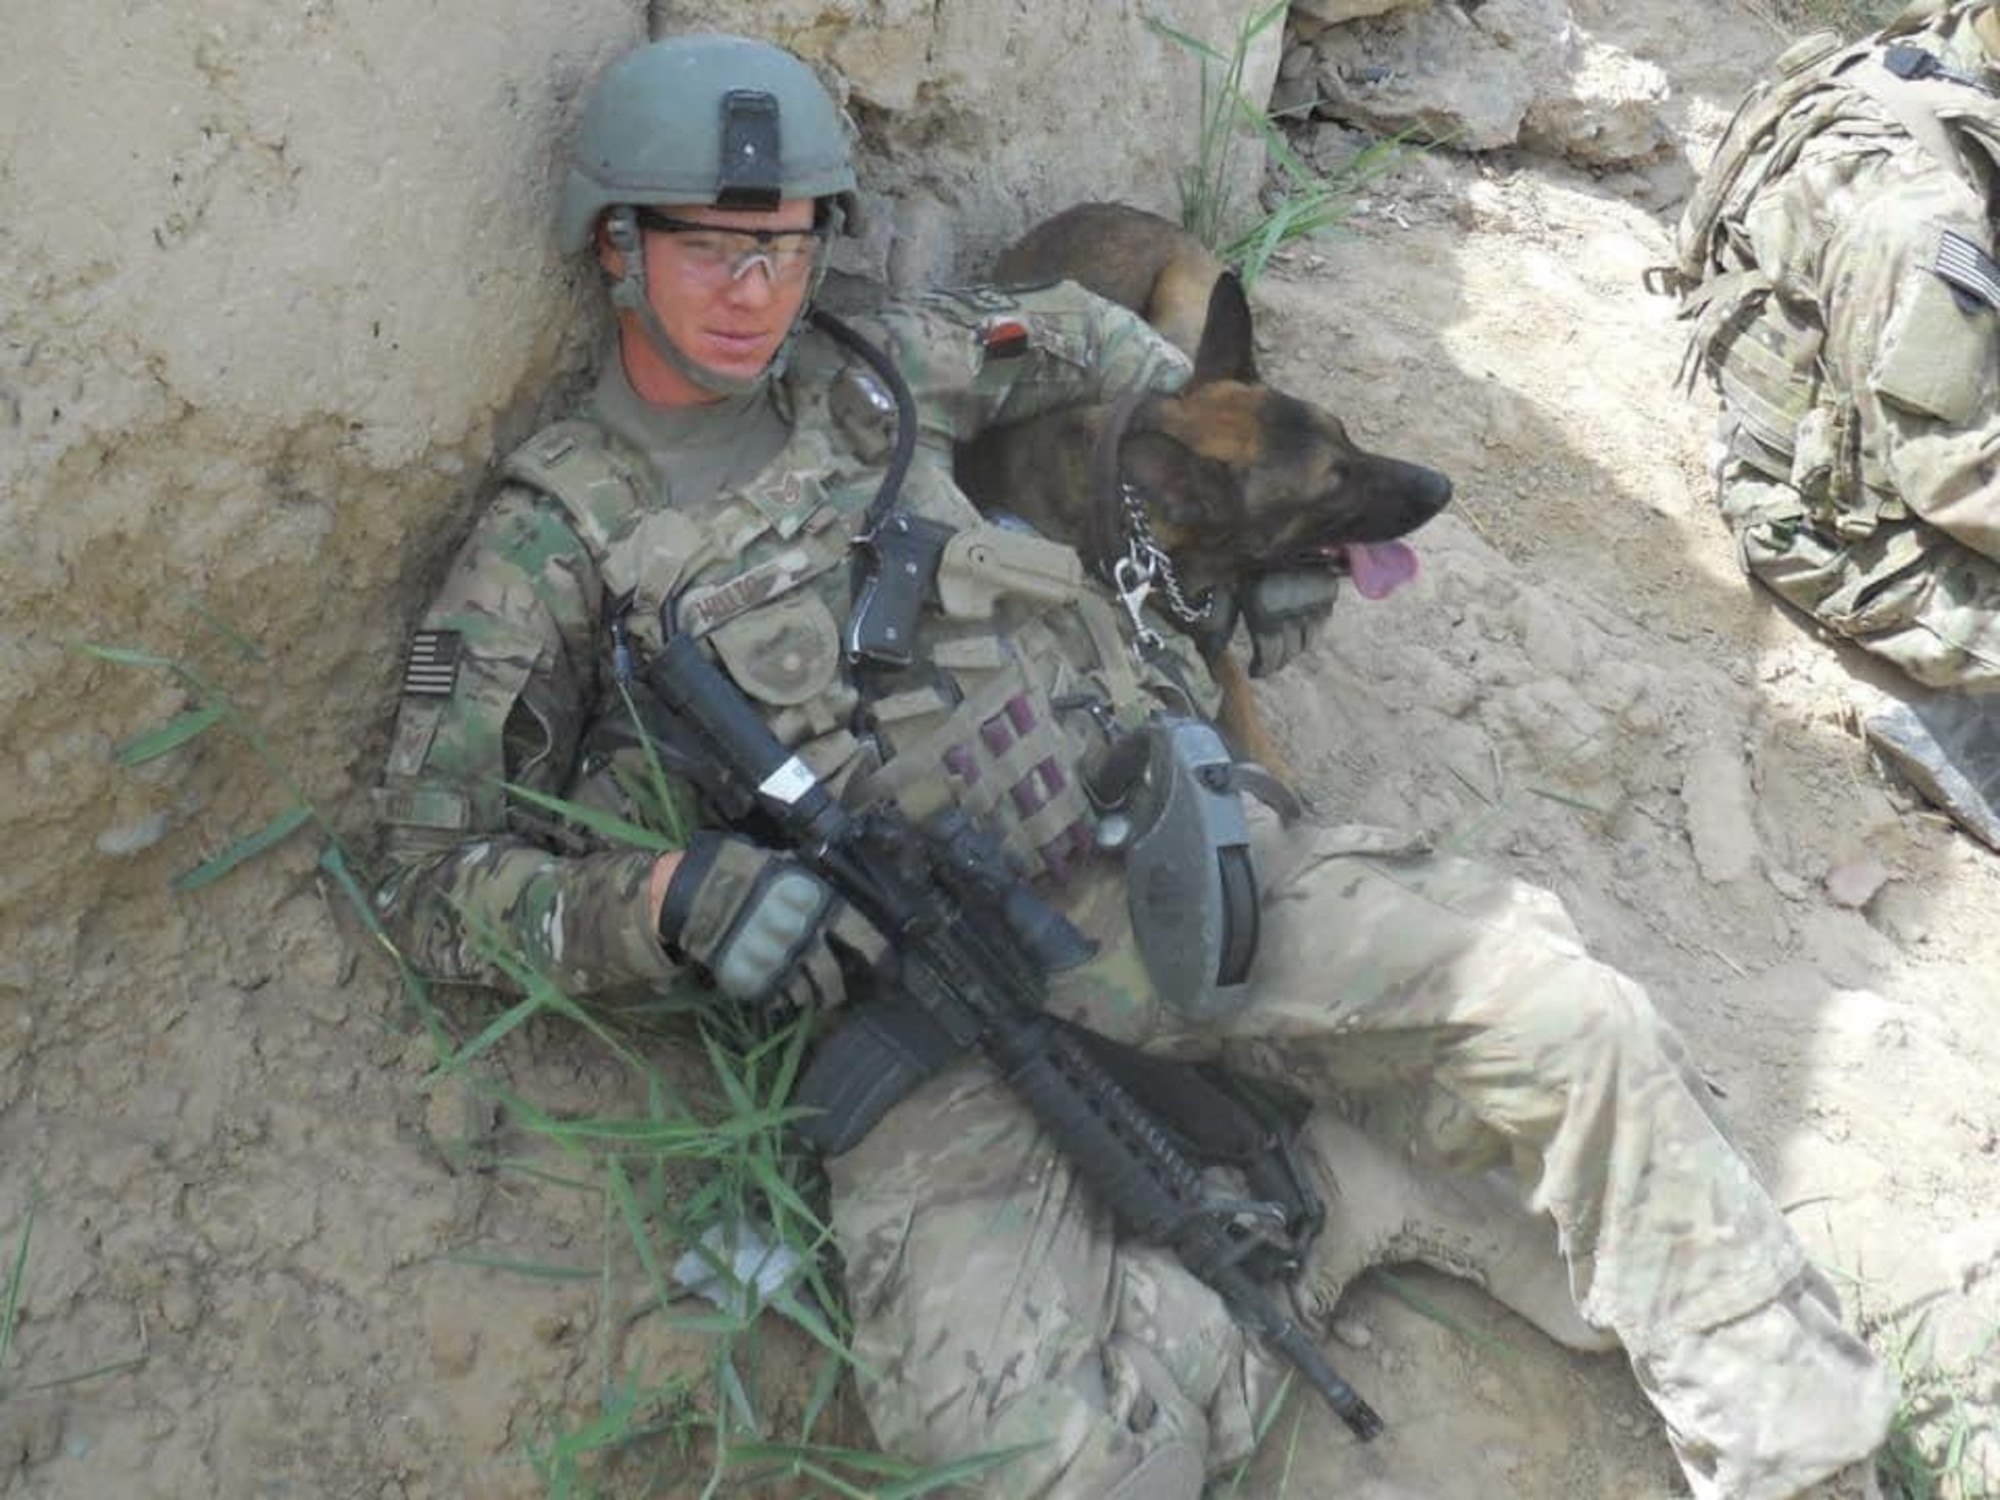 An Airman lays next to a military working dog